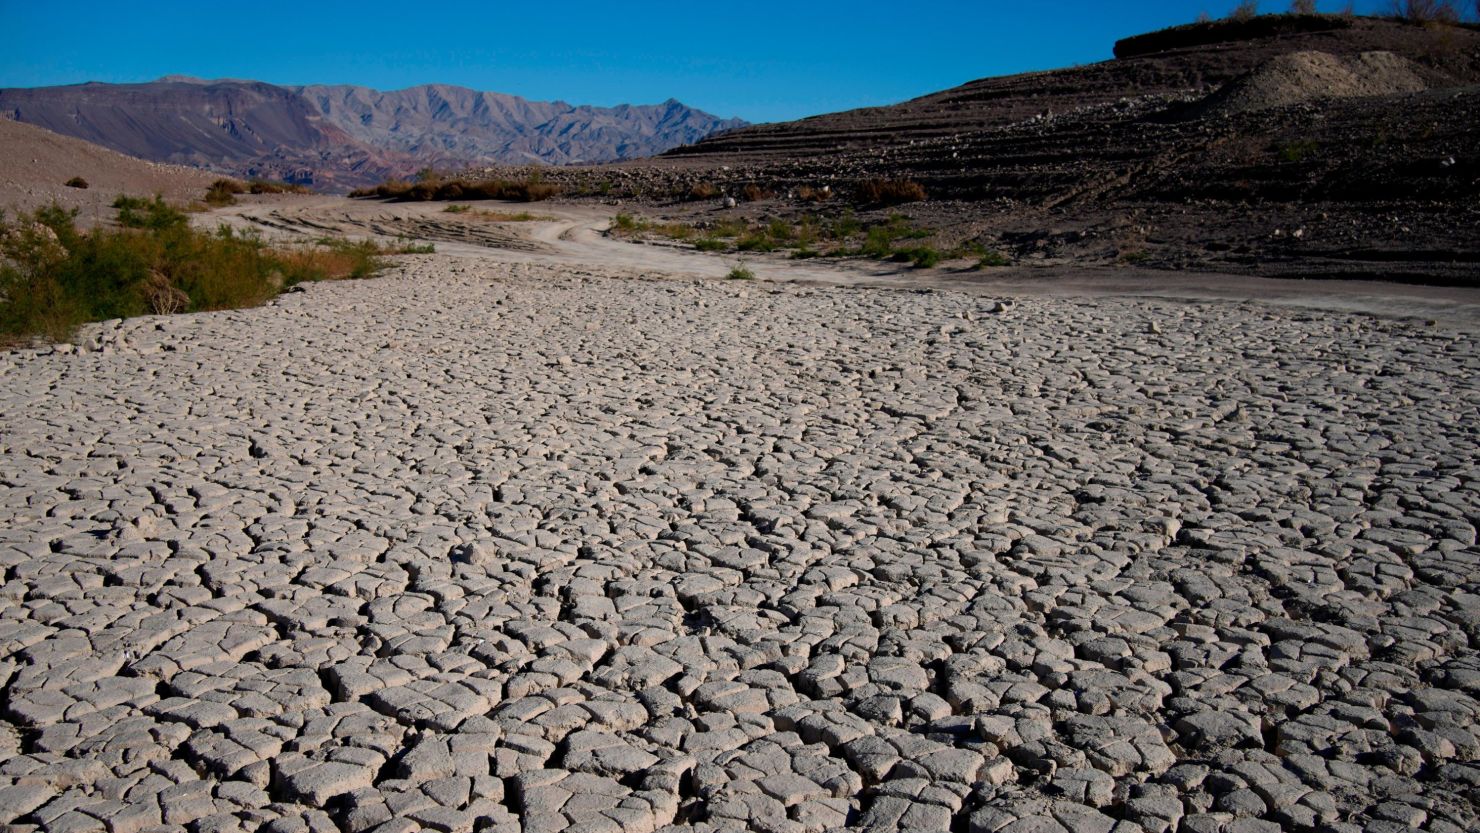 Dry, cracked ground on January 27 in an area that was once under water at Lake Mead.